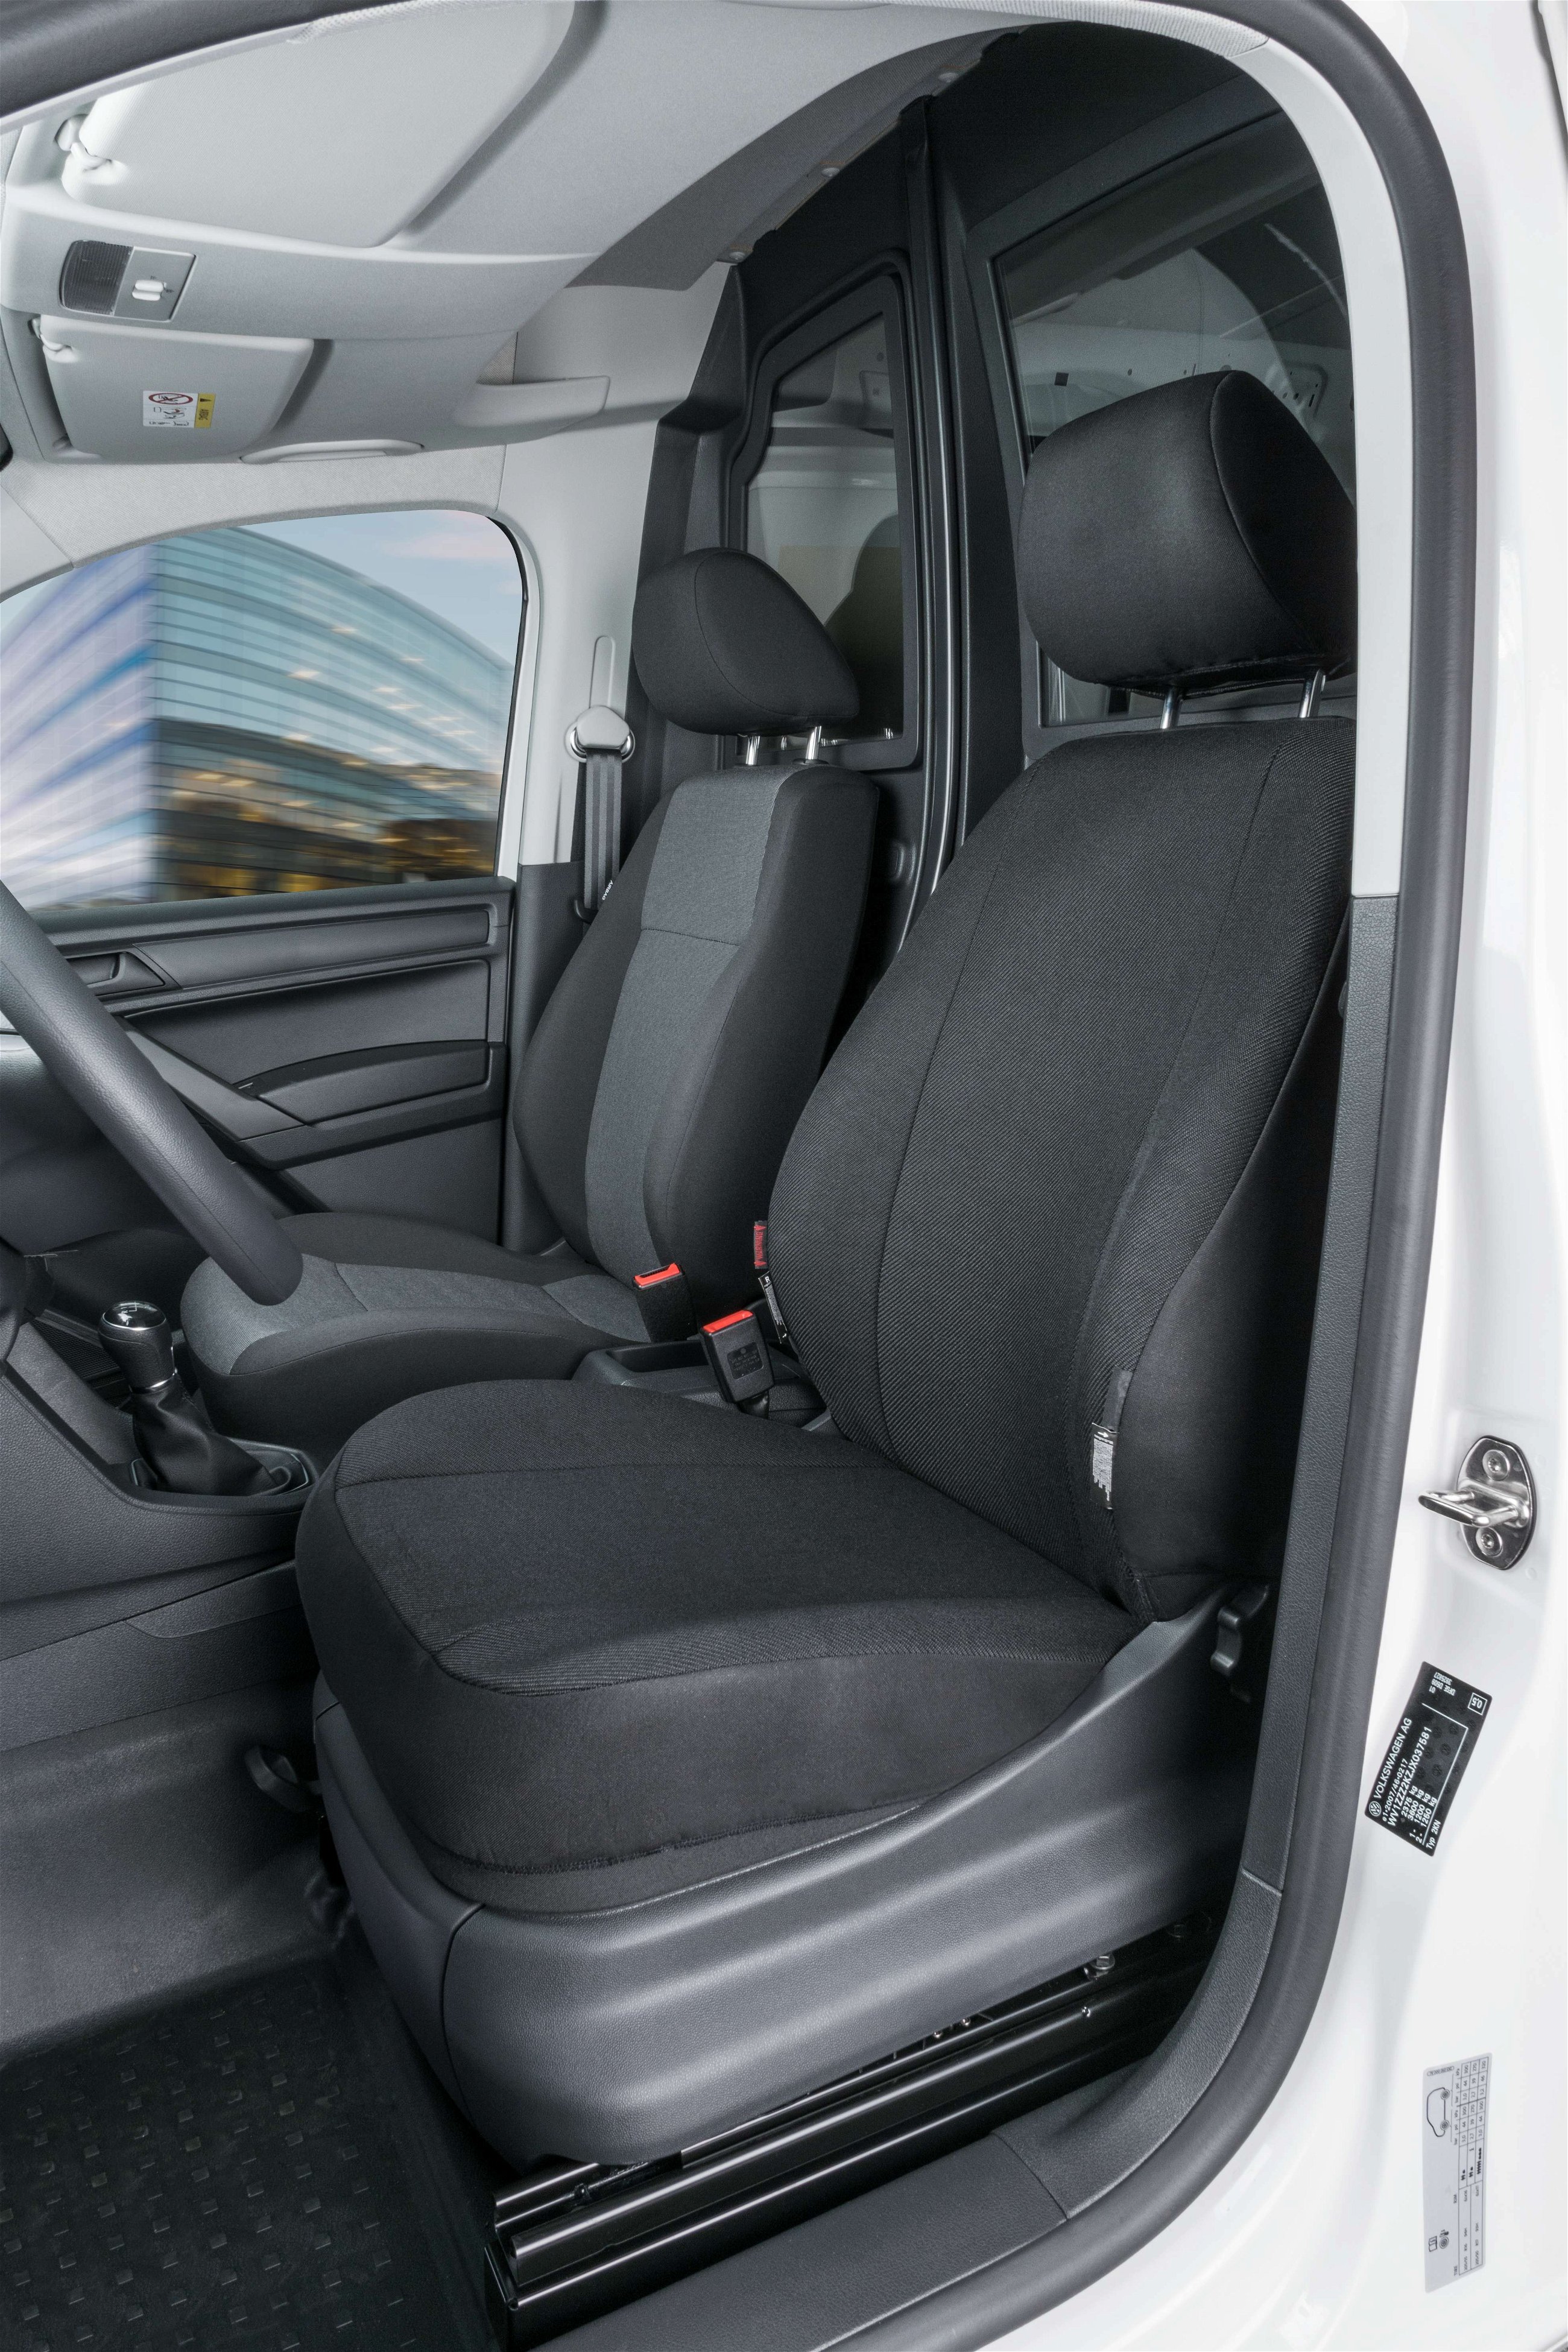 Seat cover made of fabric for VW Caddy, single seat cover front